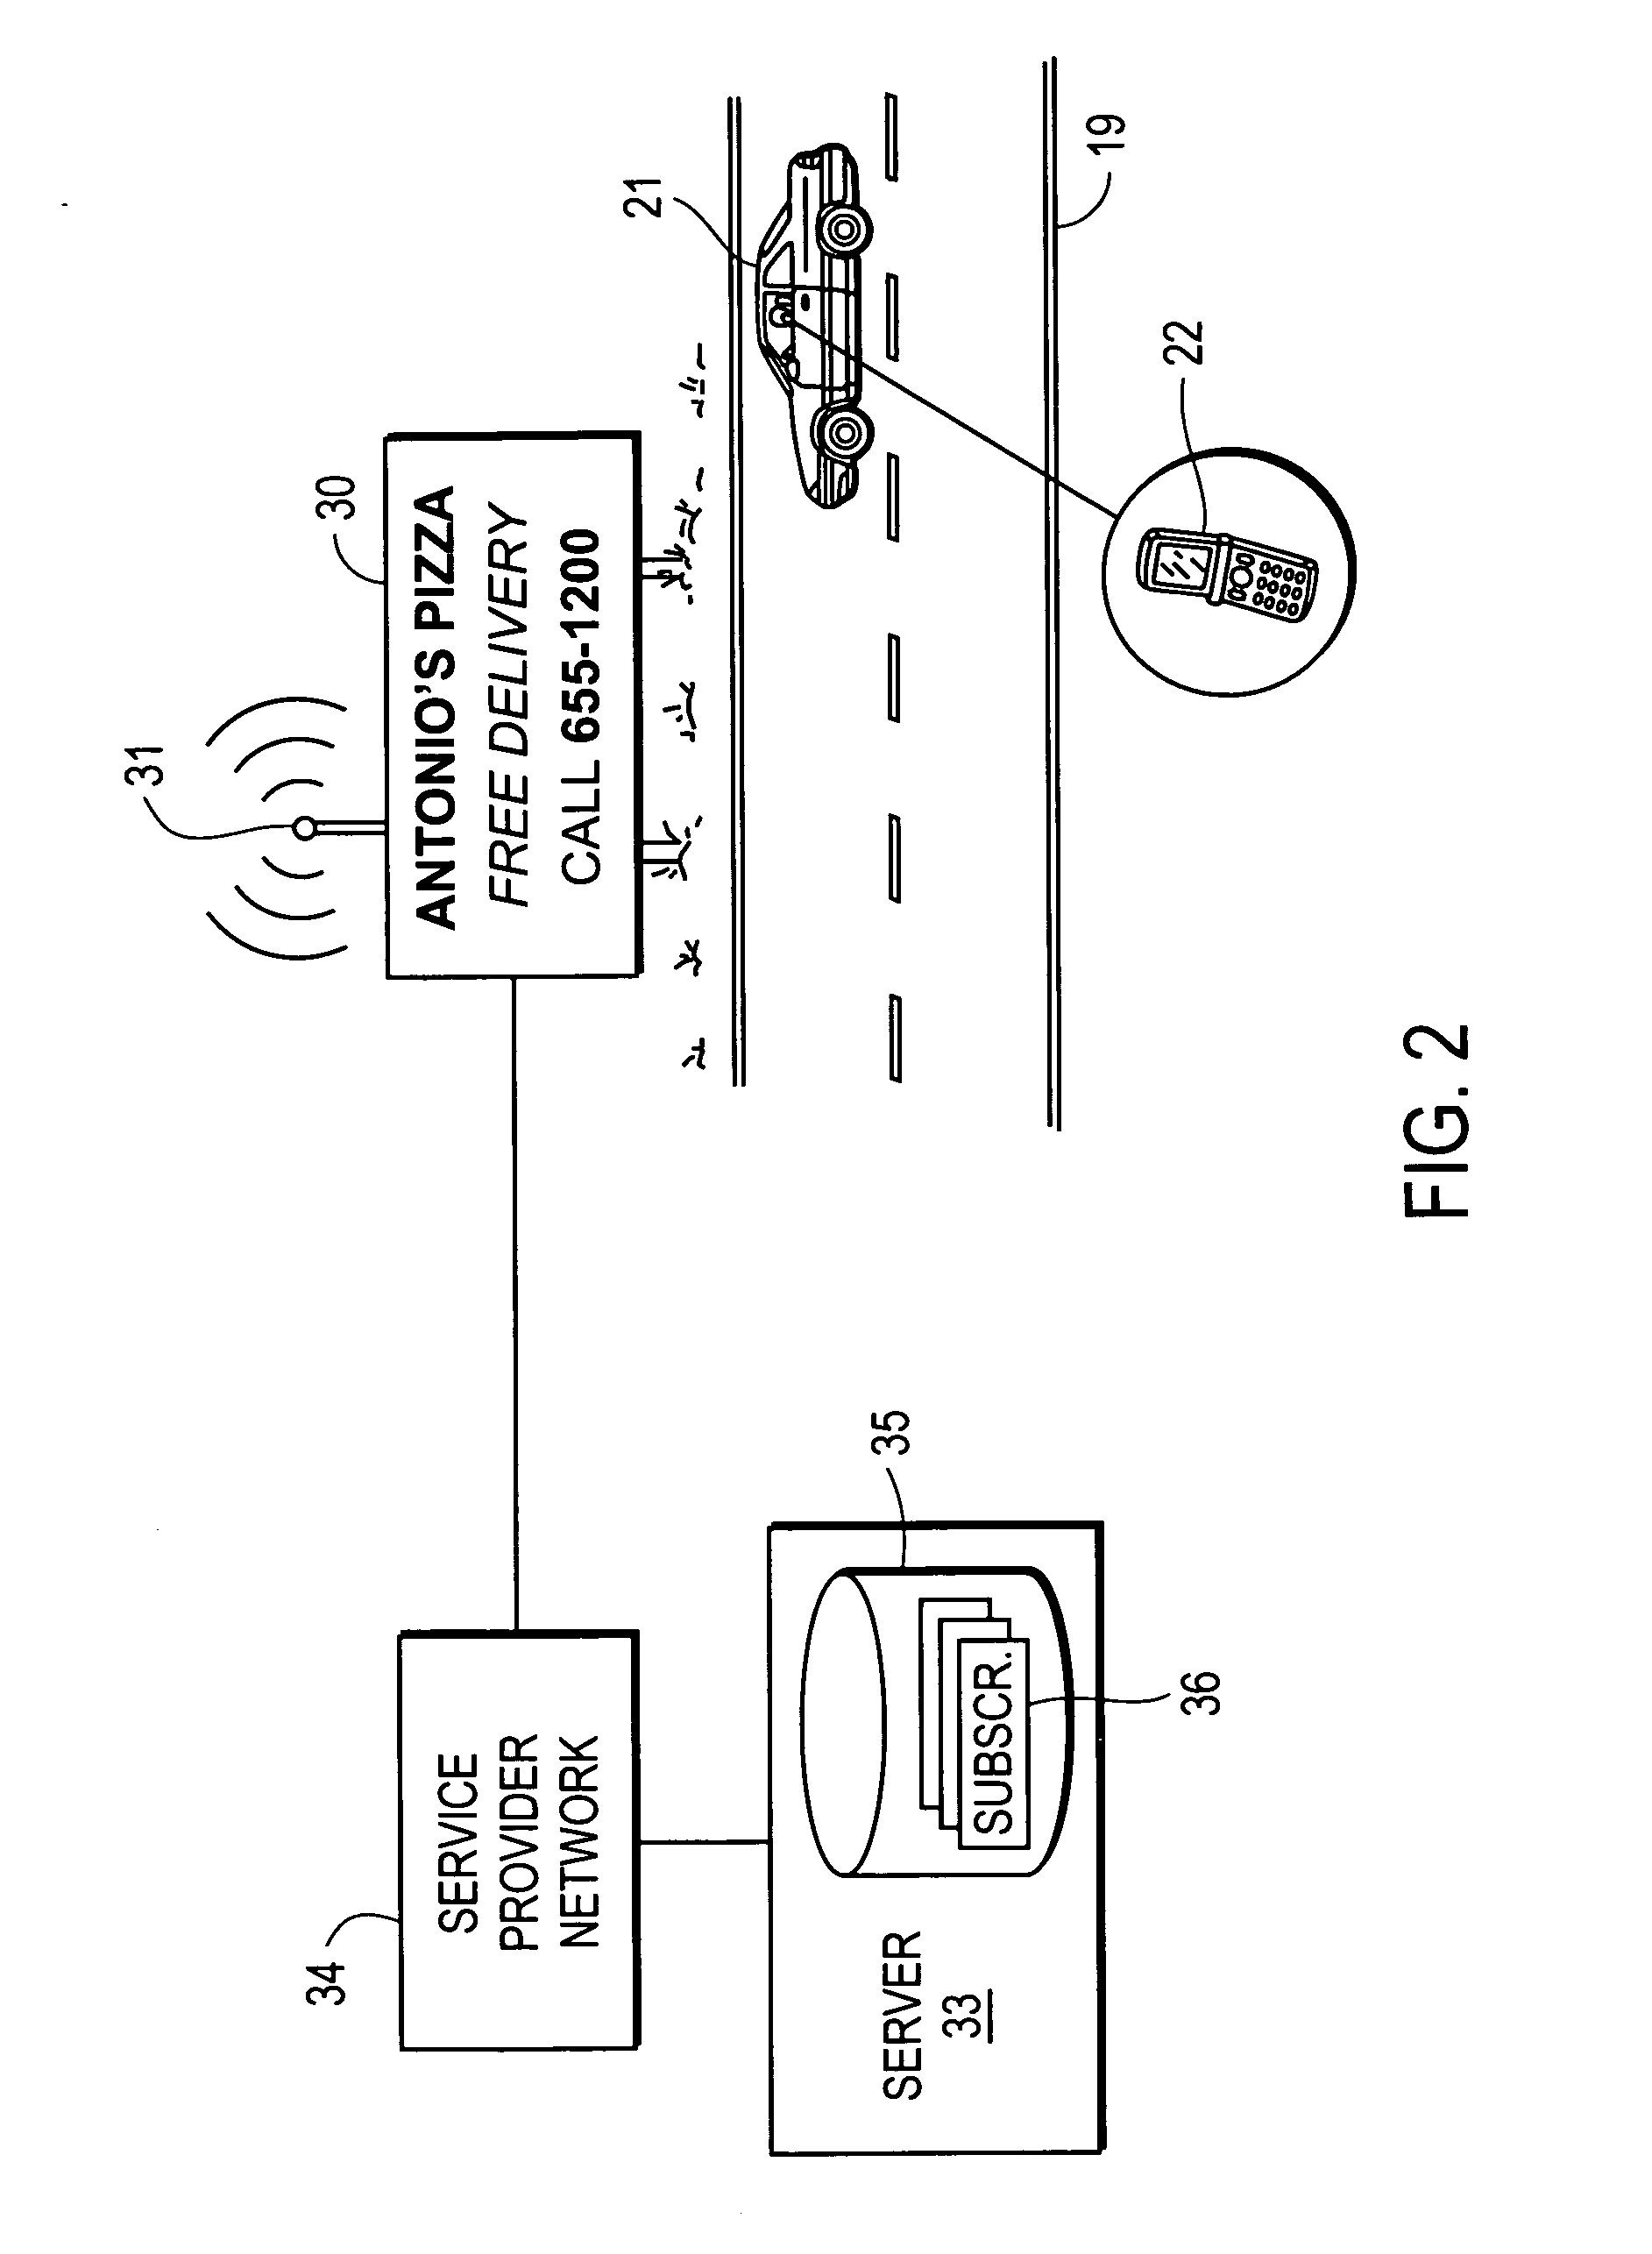 System and method for location-based mapping of soft-keys on a mobile communication device